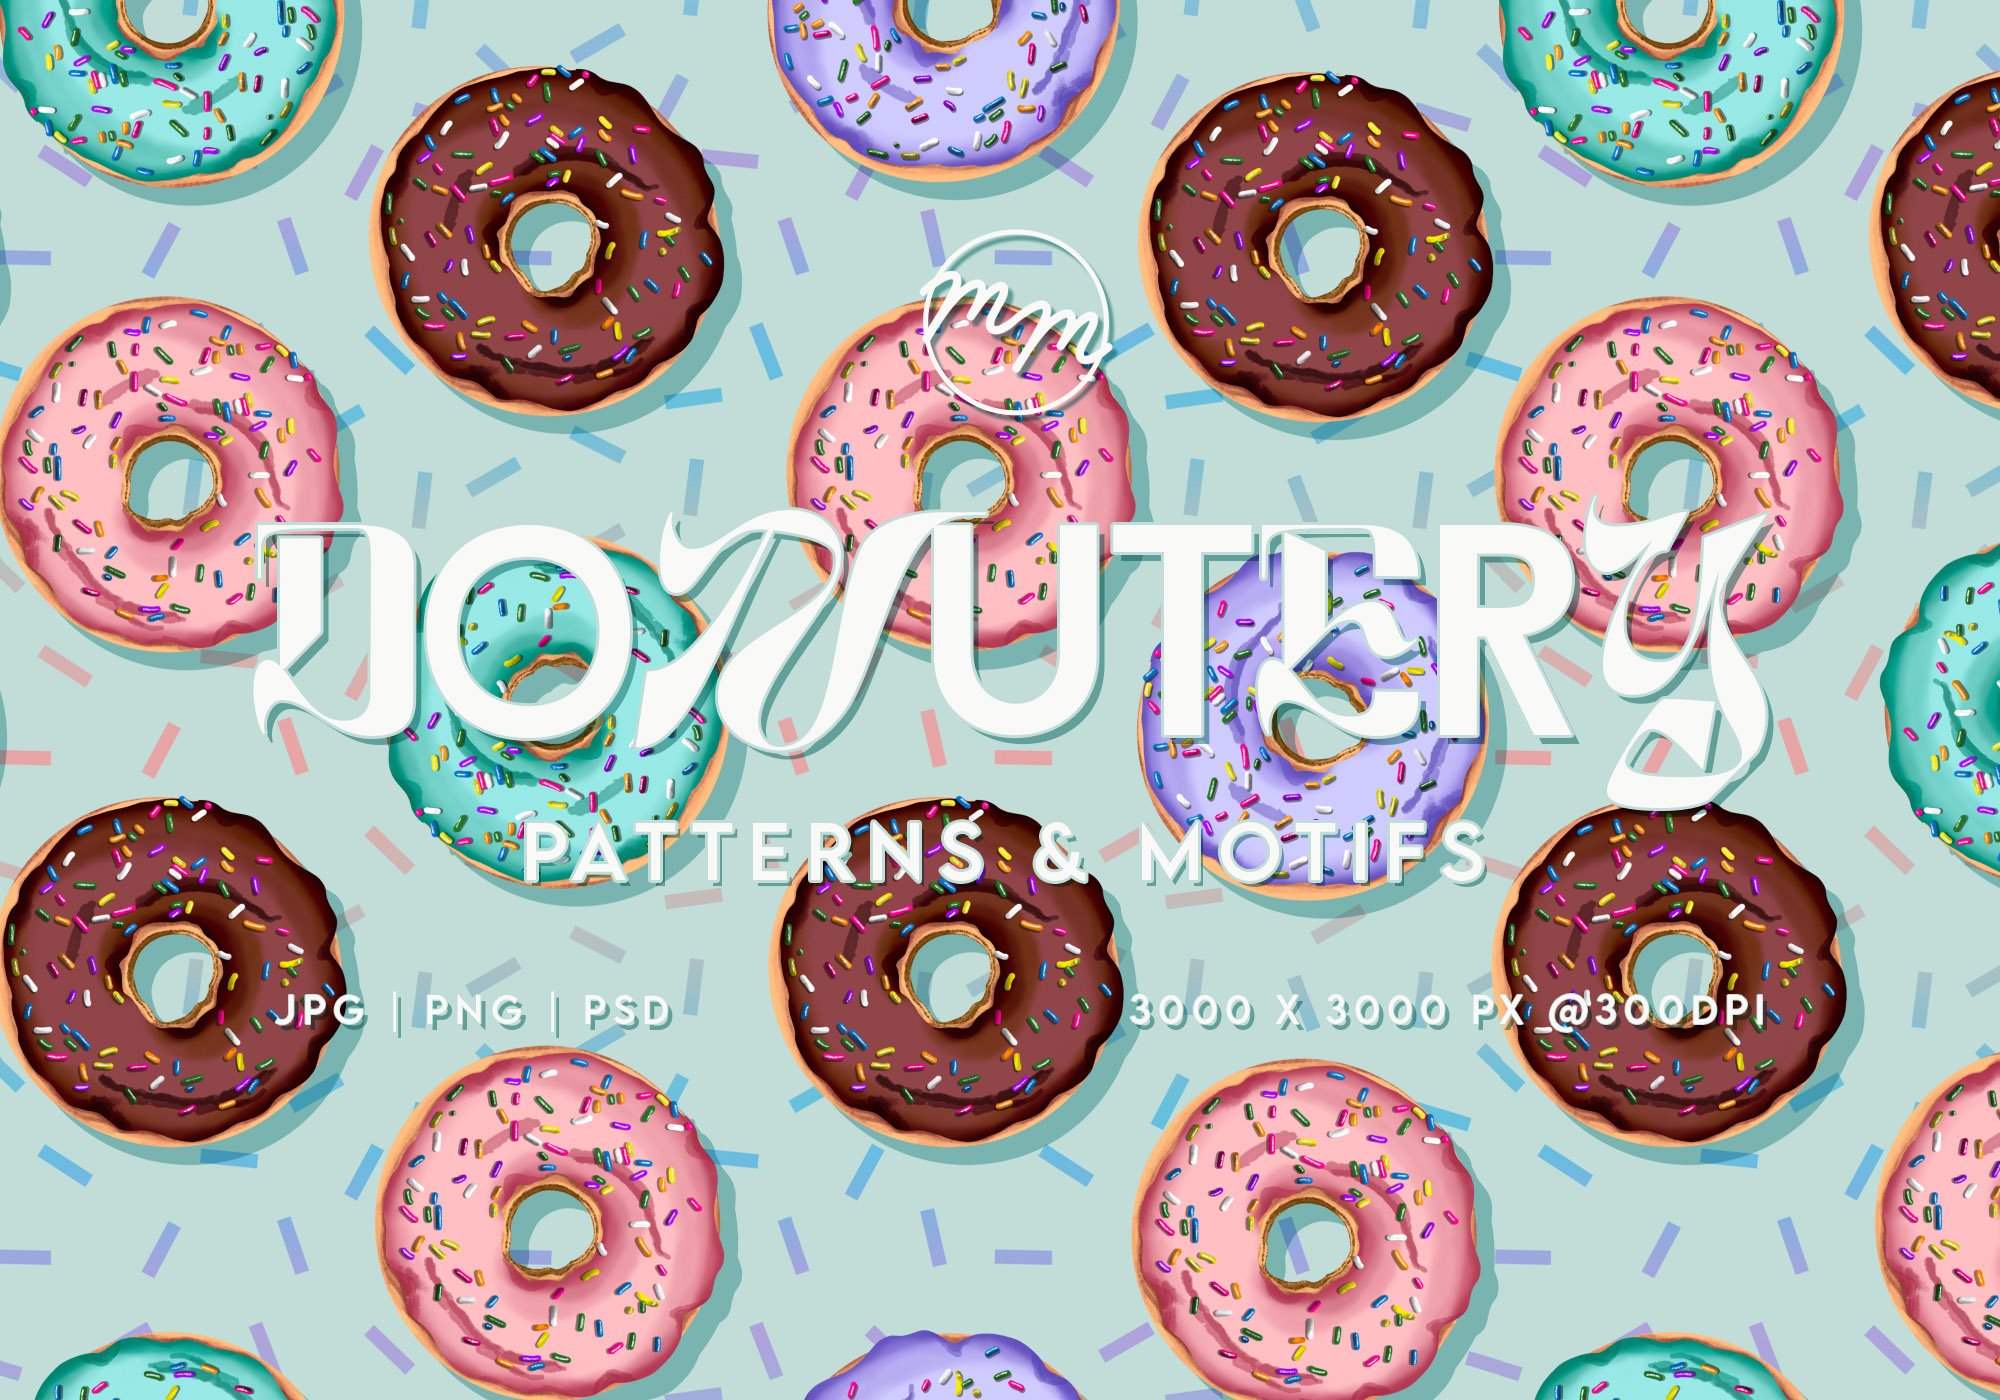 Donutery Pattern and Motifs cover image.